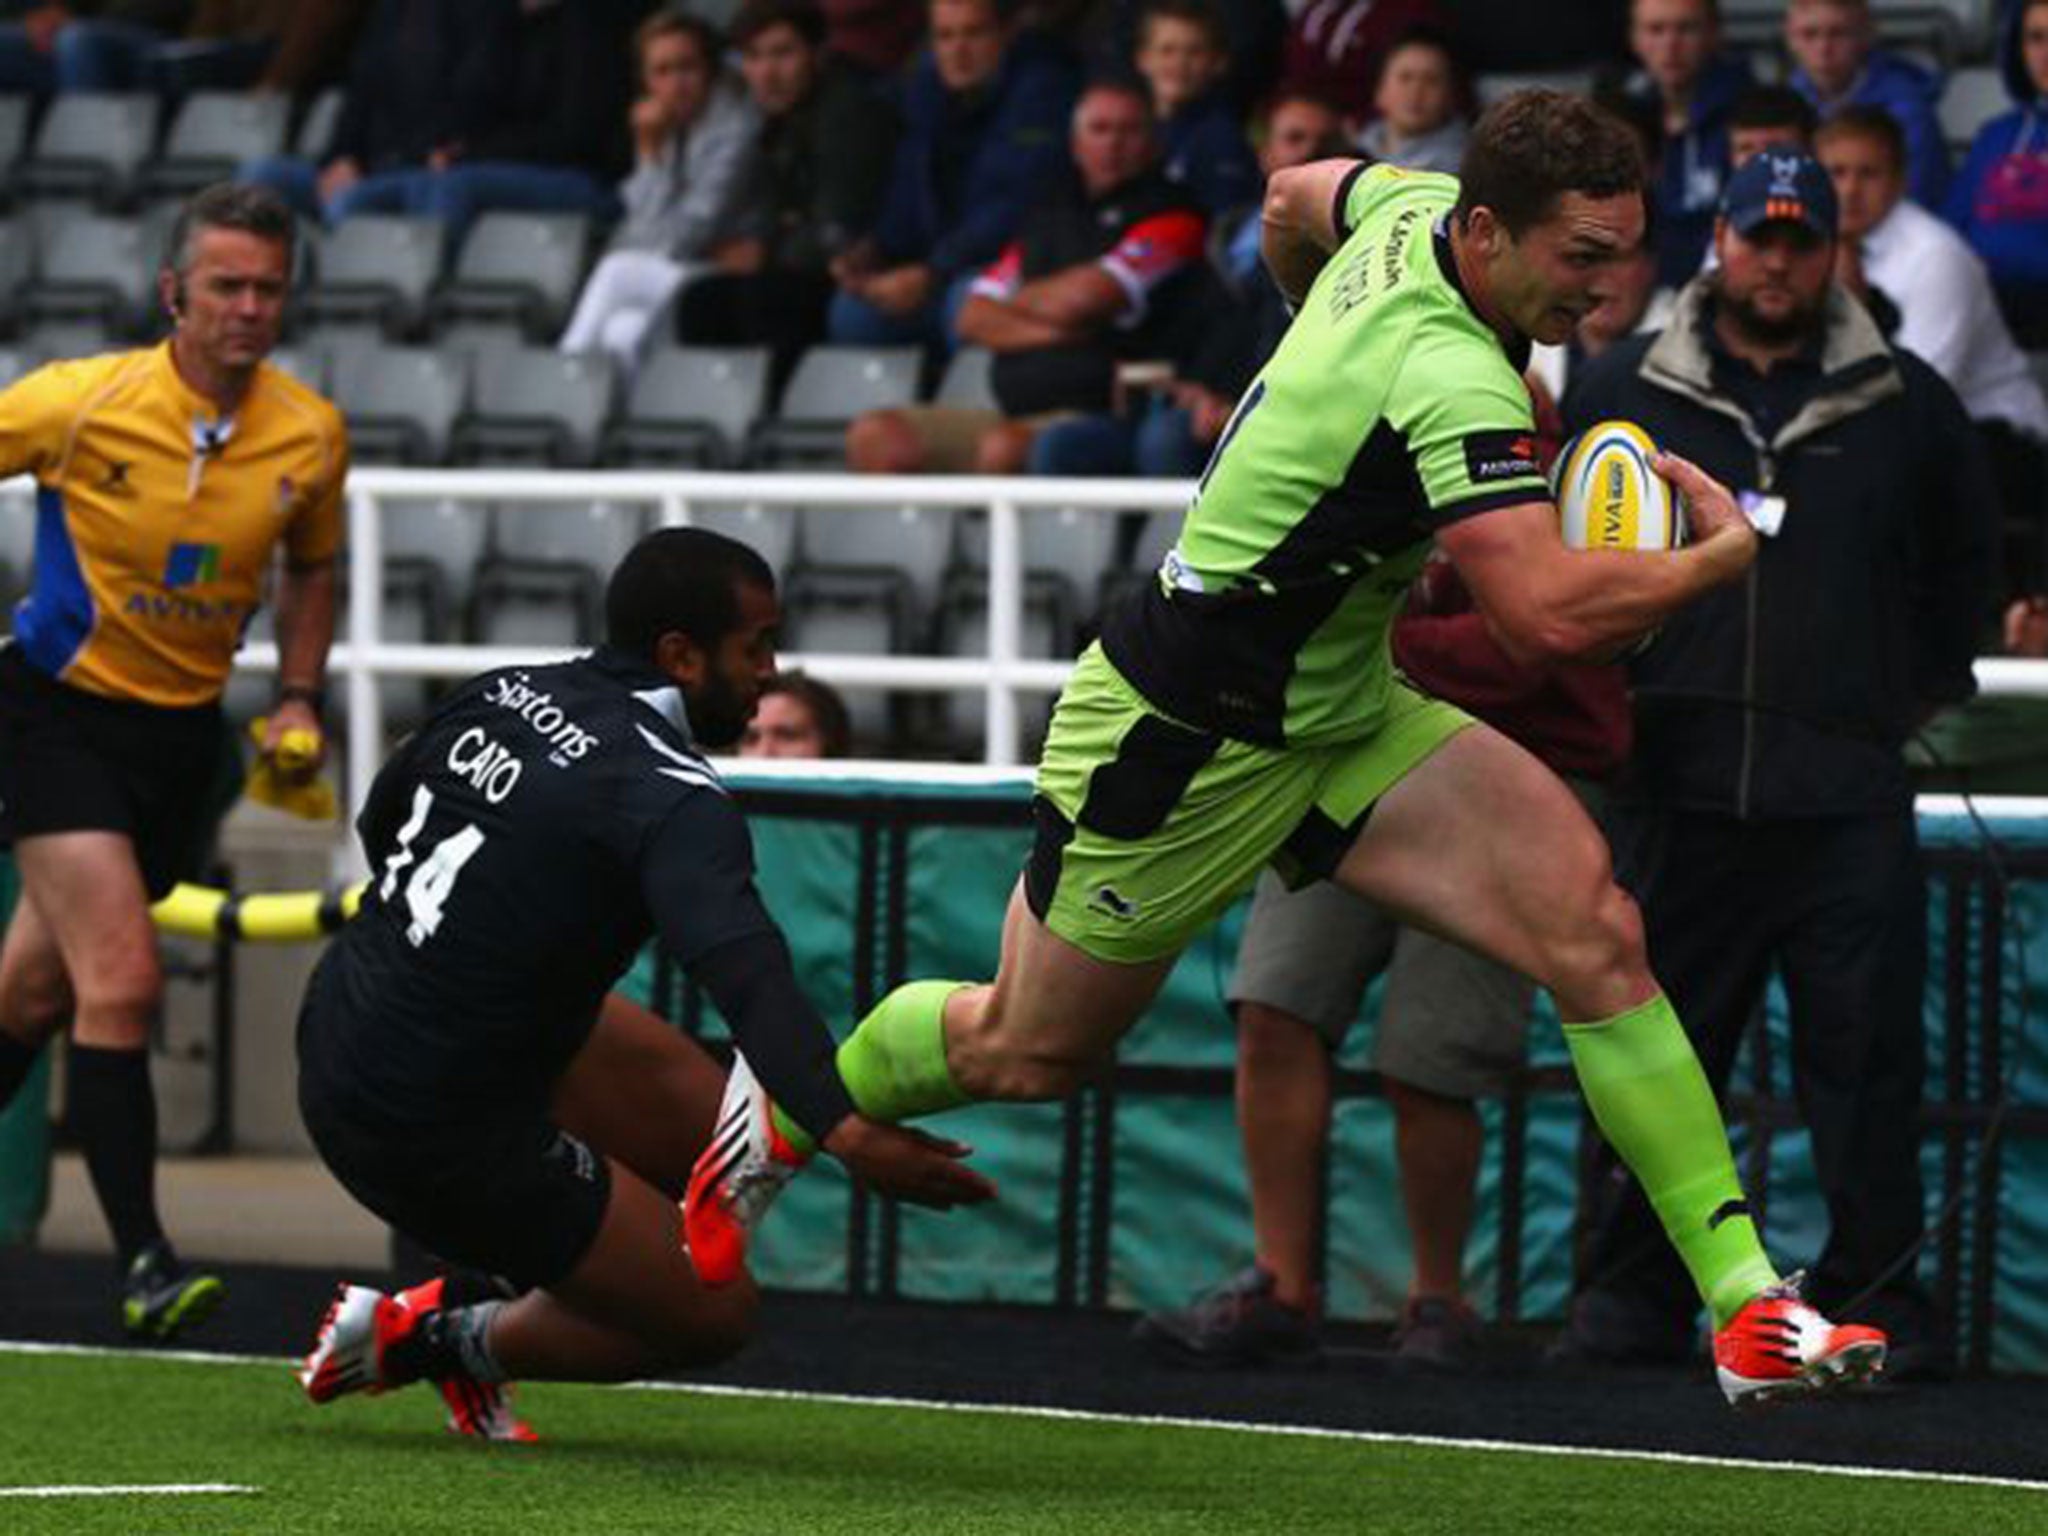 George North scores Saints’ fourth try at Newcastle today